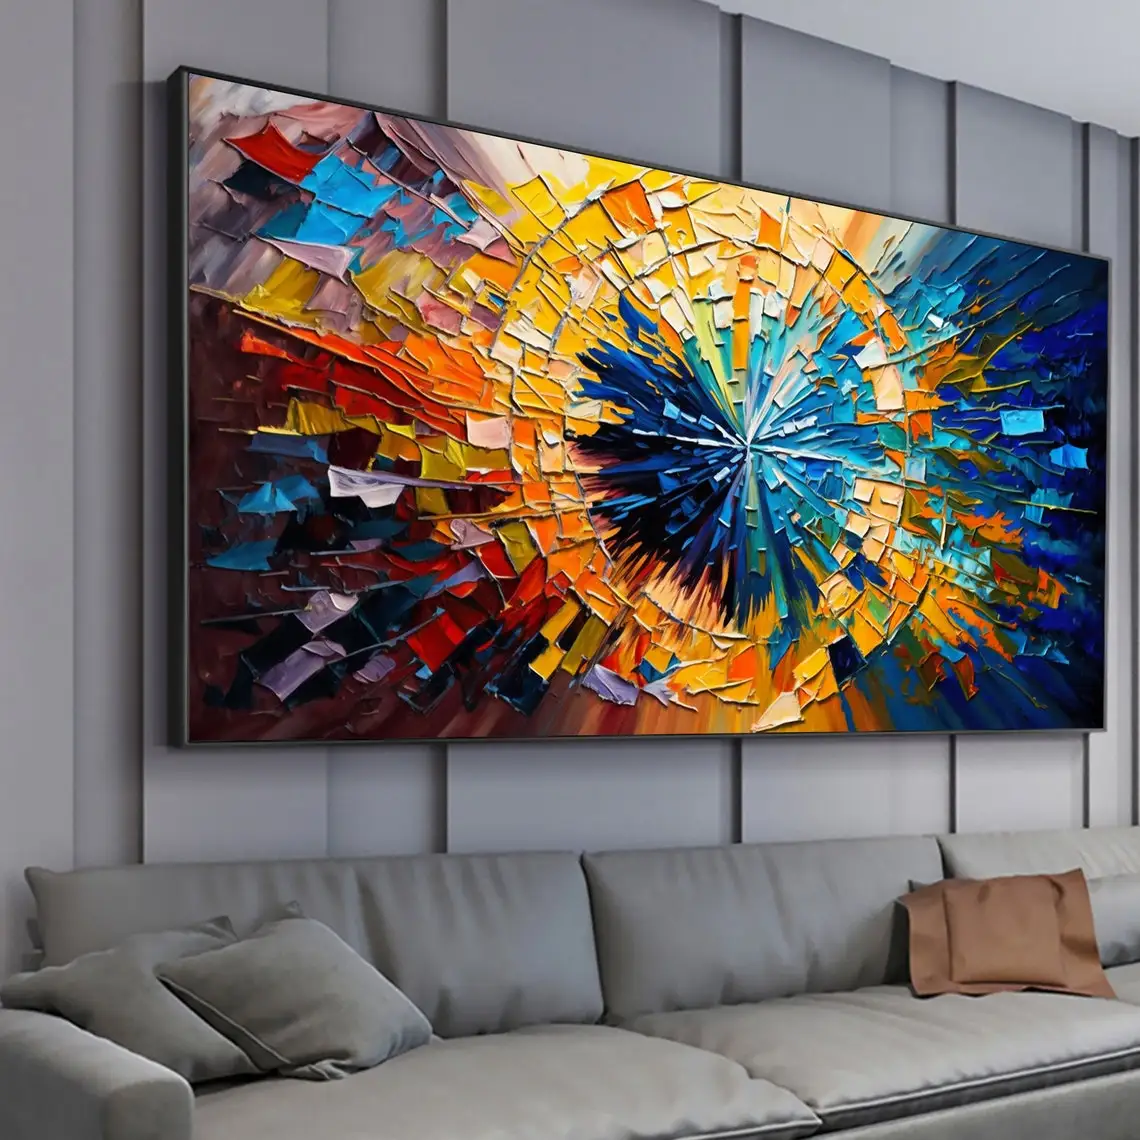 Colorful Oil Painting On Canvas Large Wall Art Abstract Textured Hand Painted Painting Custom Painting Living Room Wall Decor